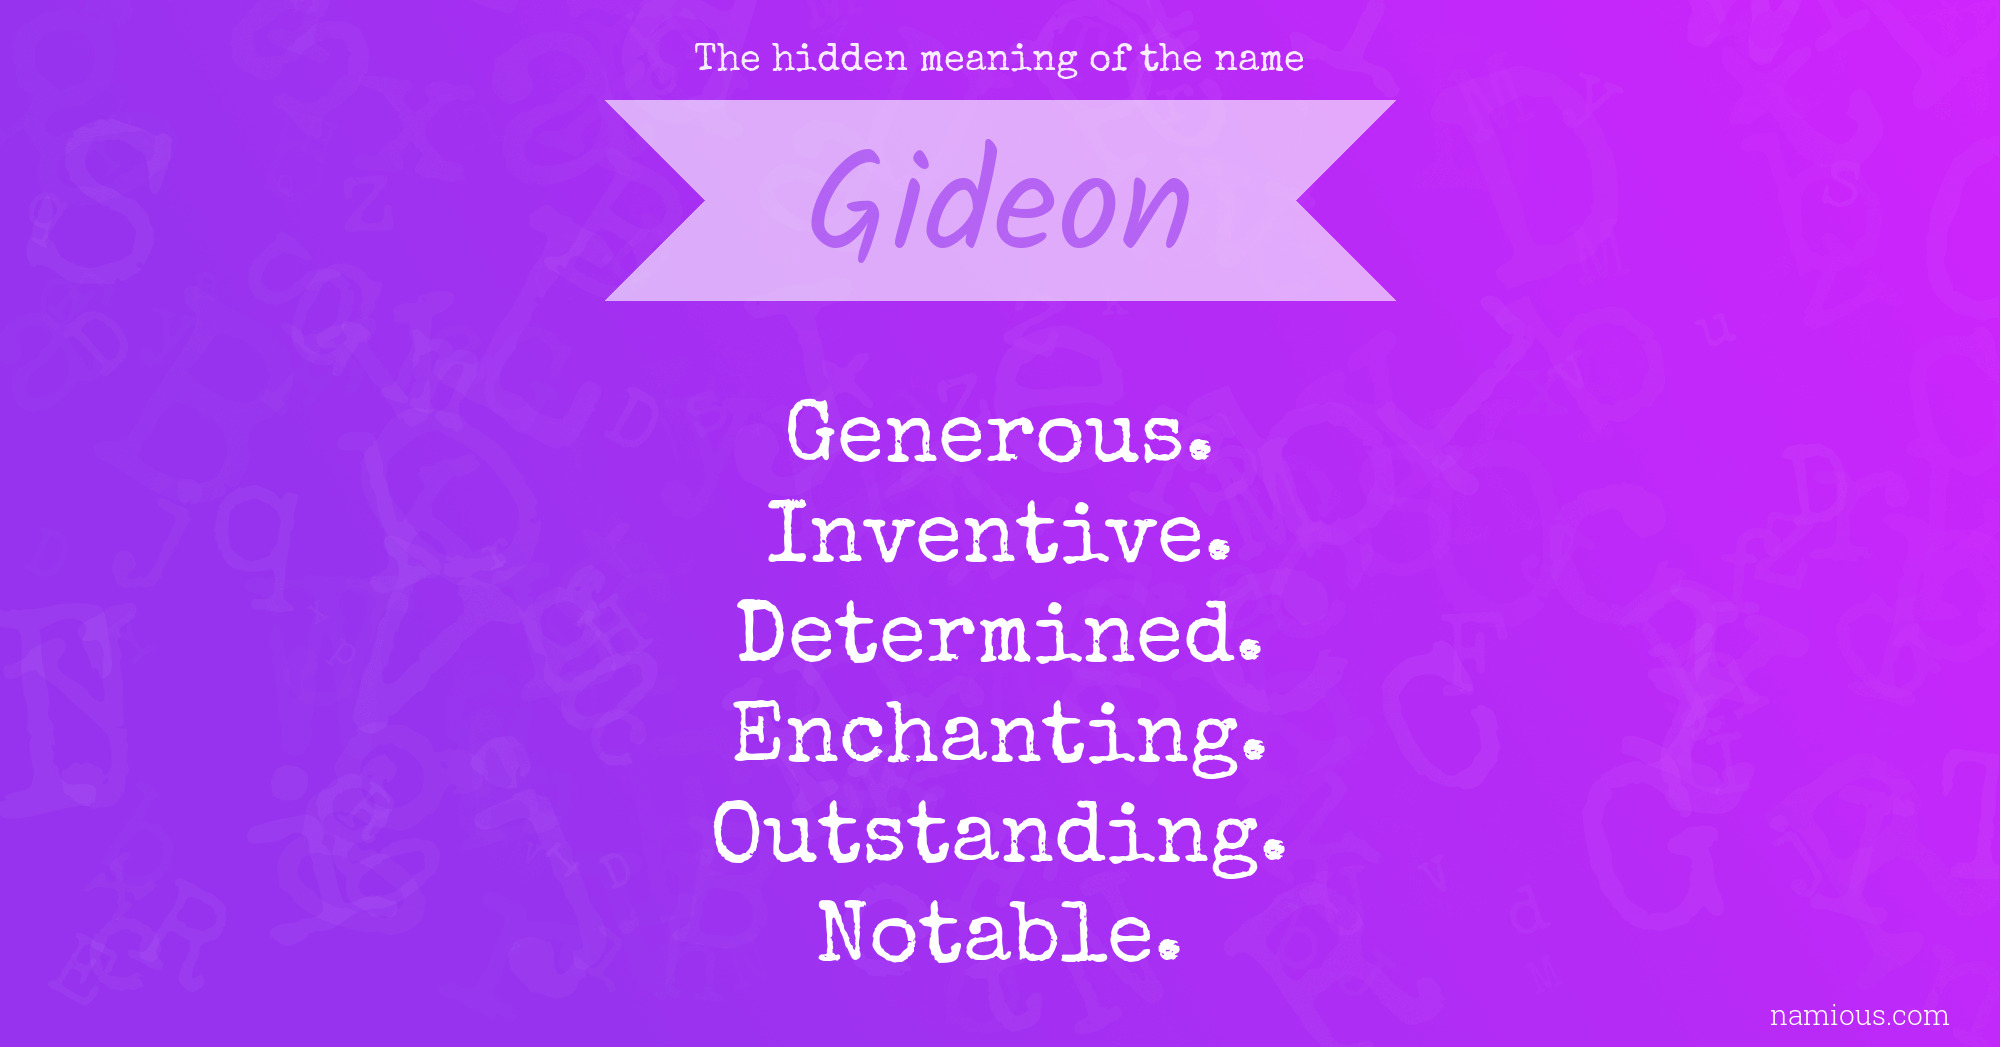 The hidden meaning of the name Gideon